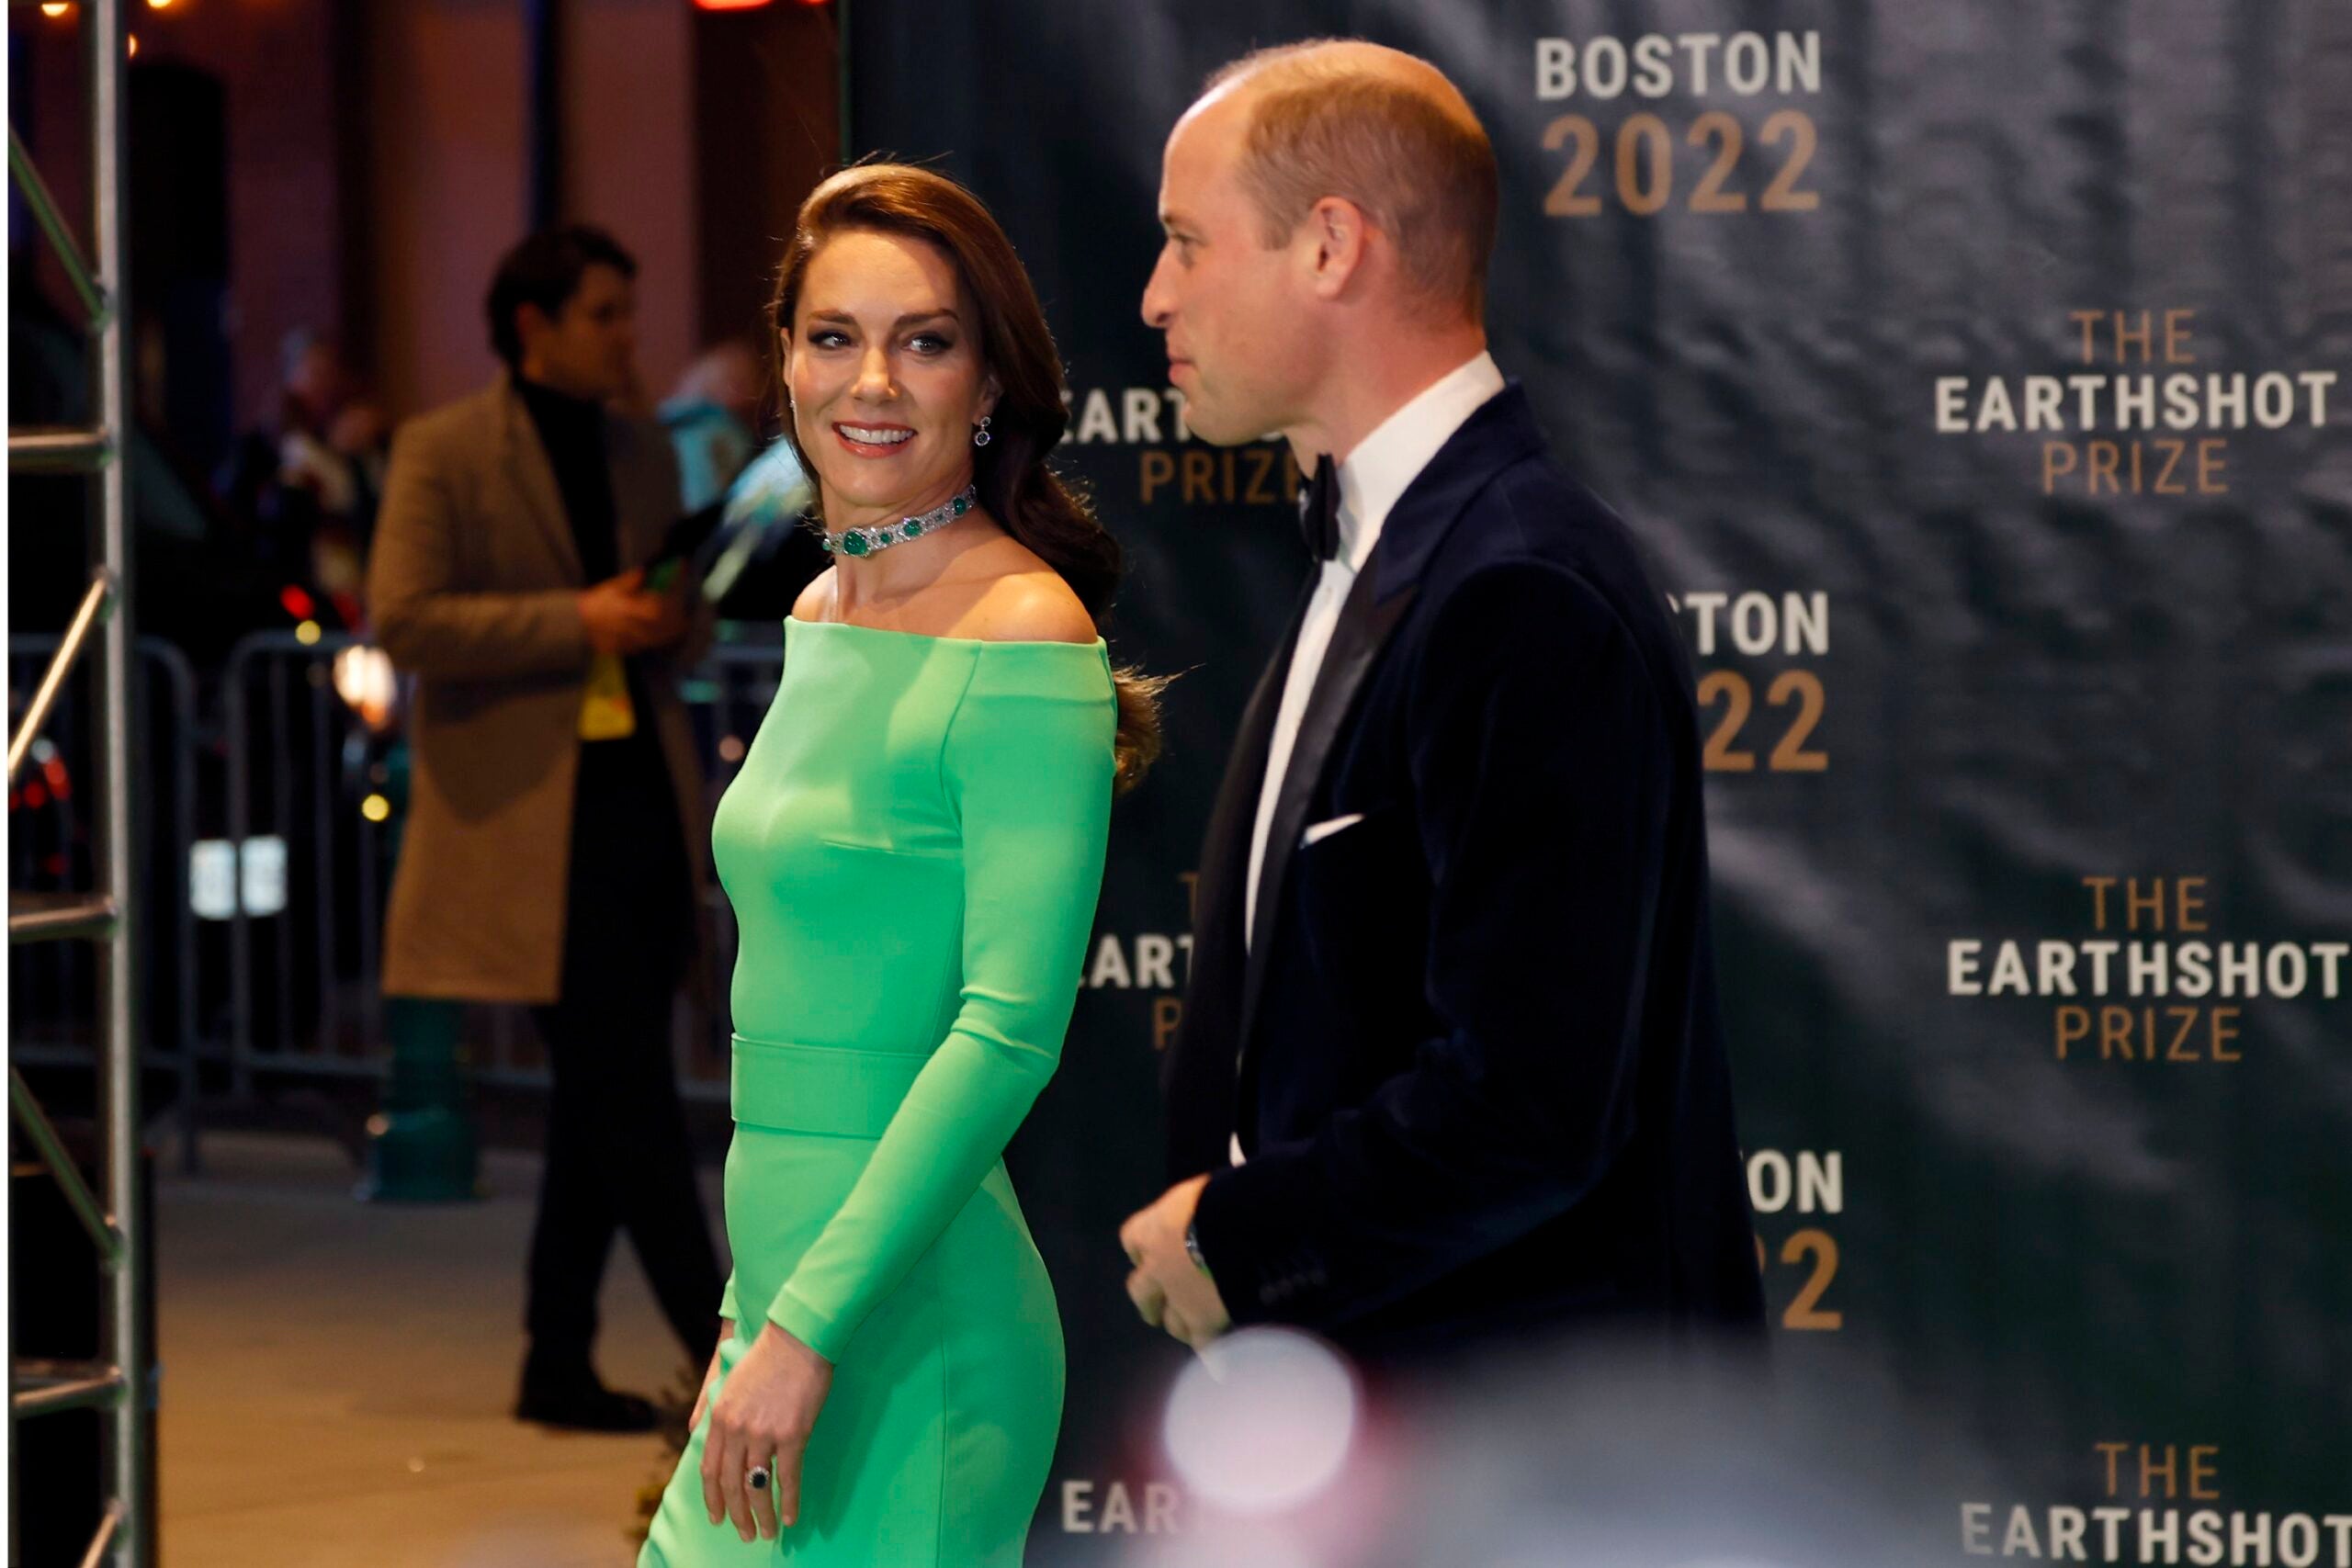 Photos: Stars arrive at Prince William's at Earthshot Prize awards